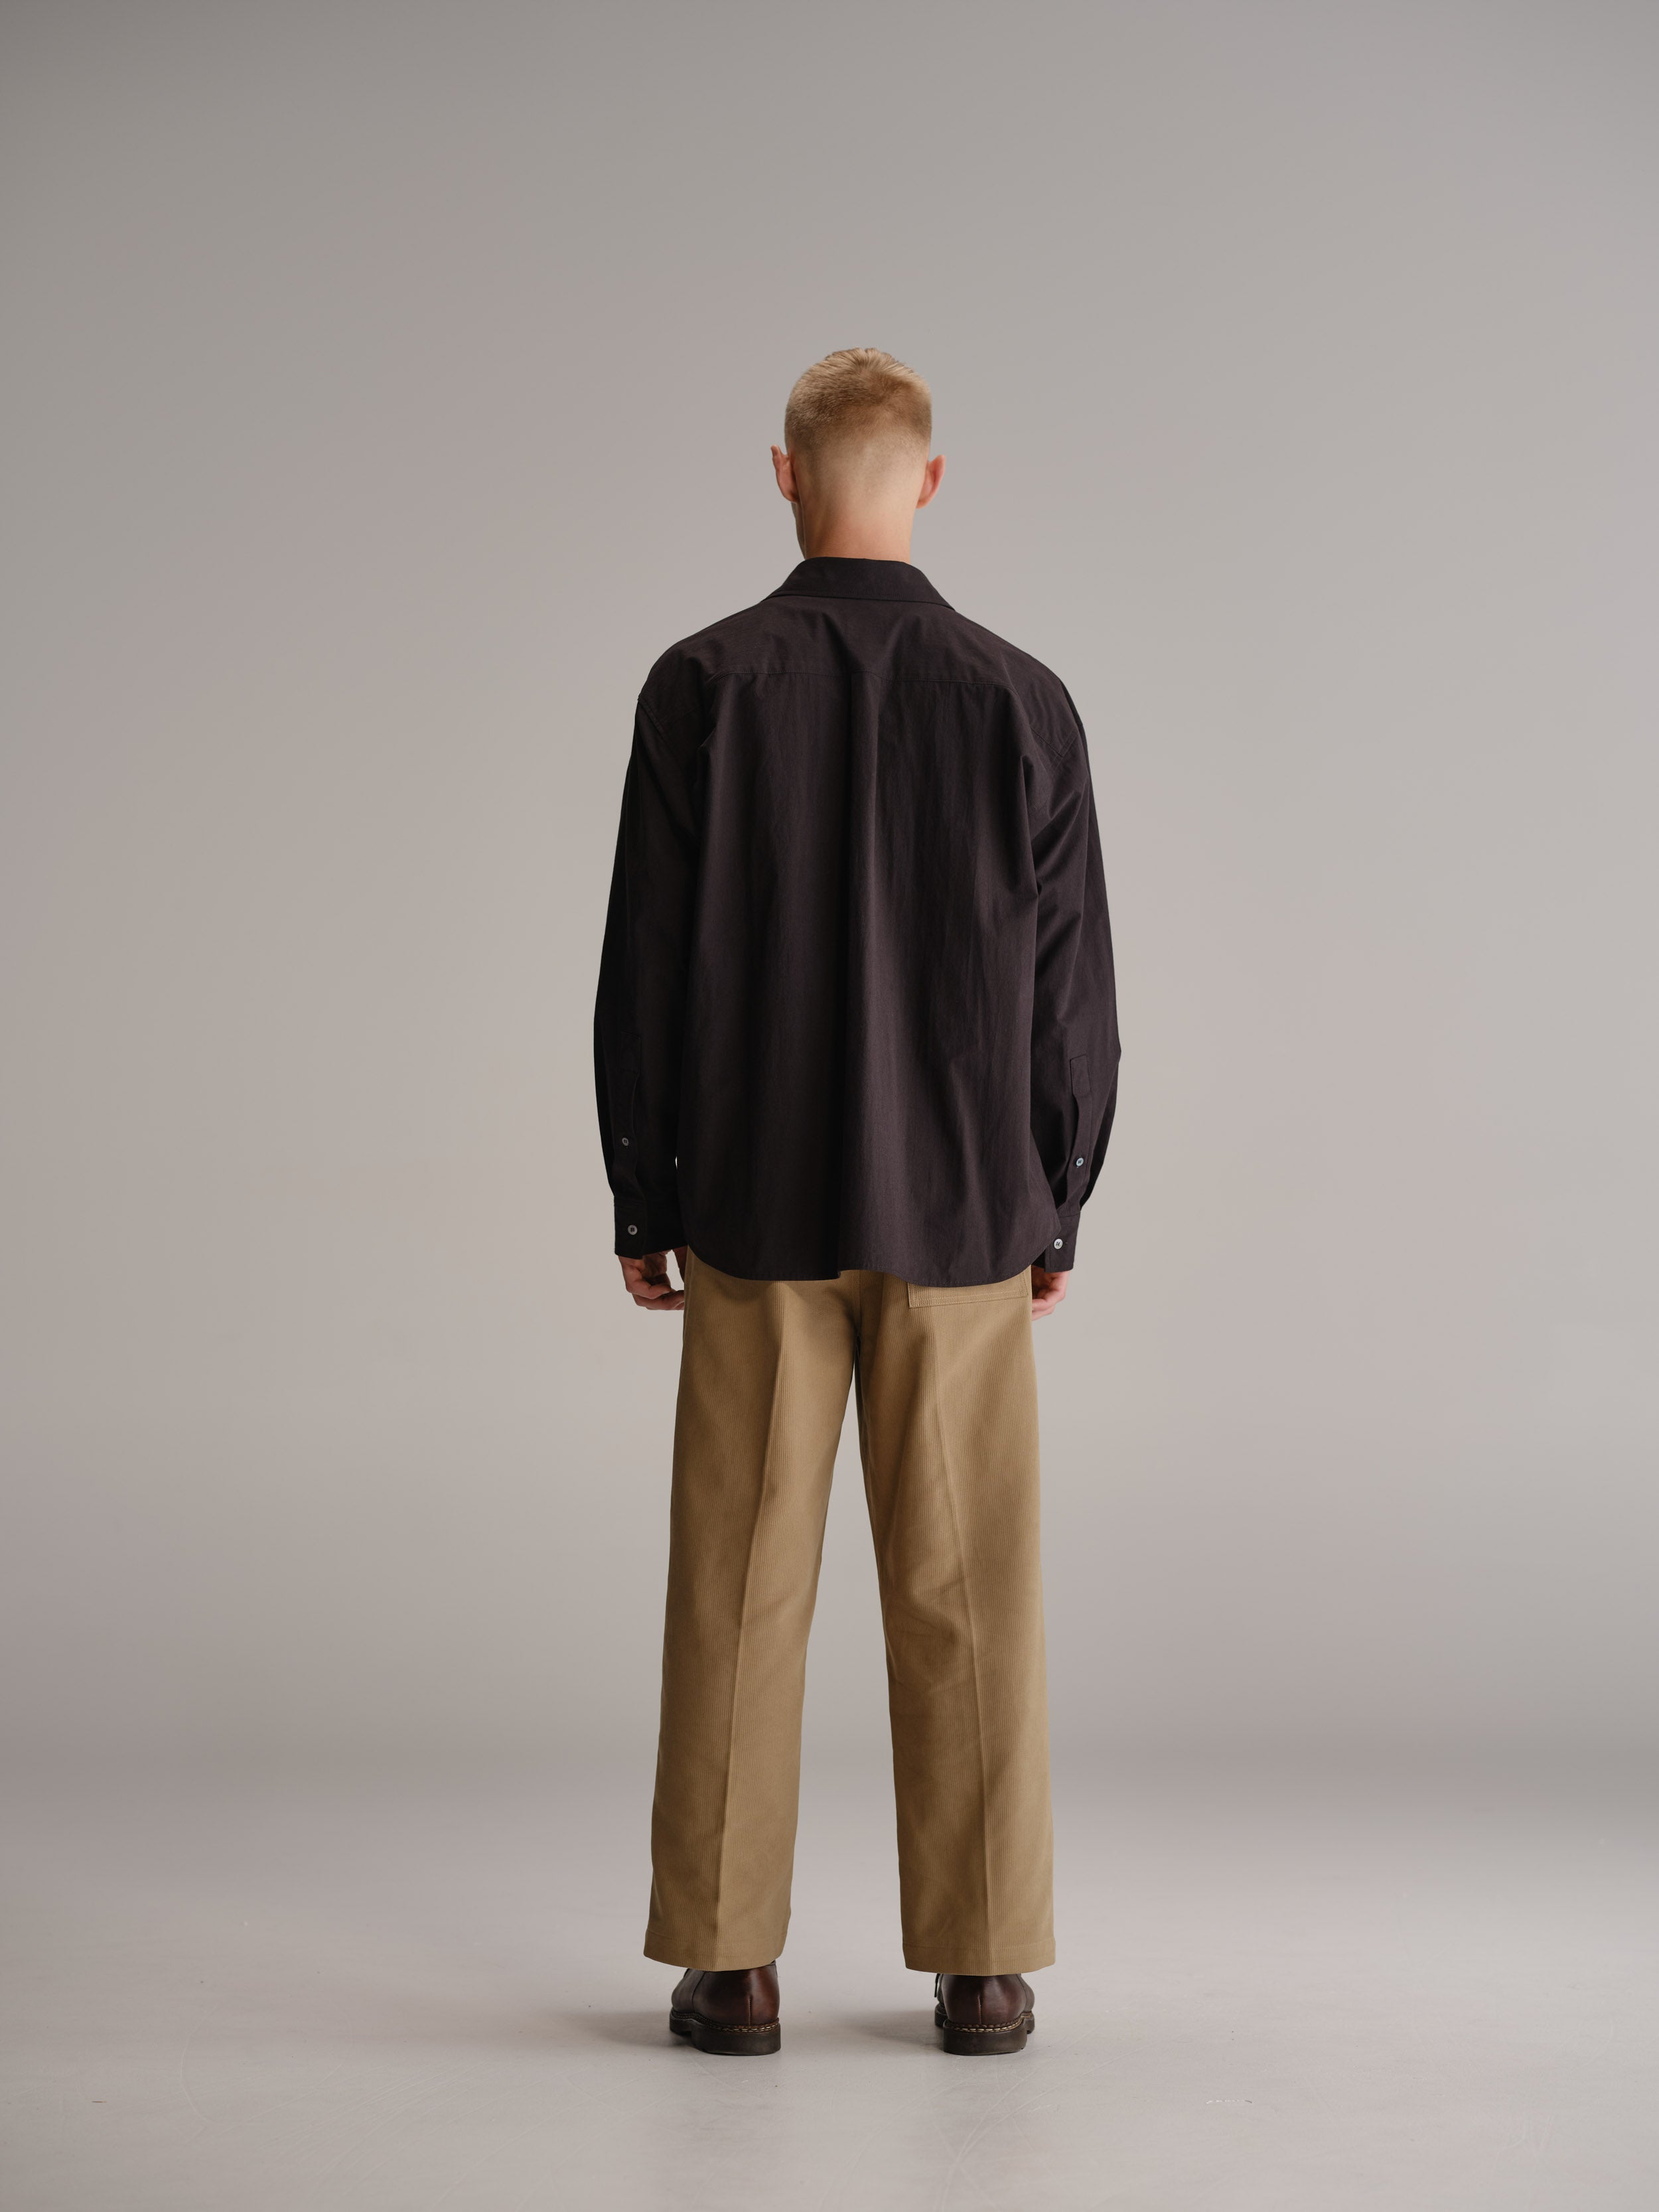 Back view of man standing in white studio with arms by side wearing black shirt, fawn pant and brown leather shoes.